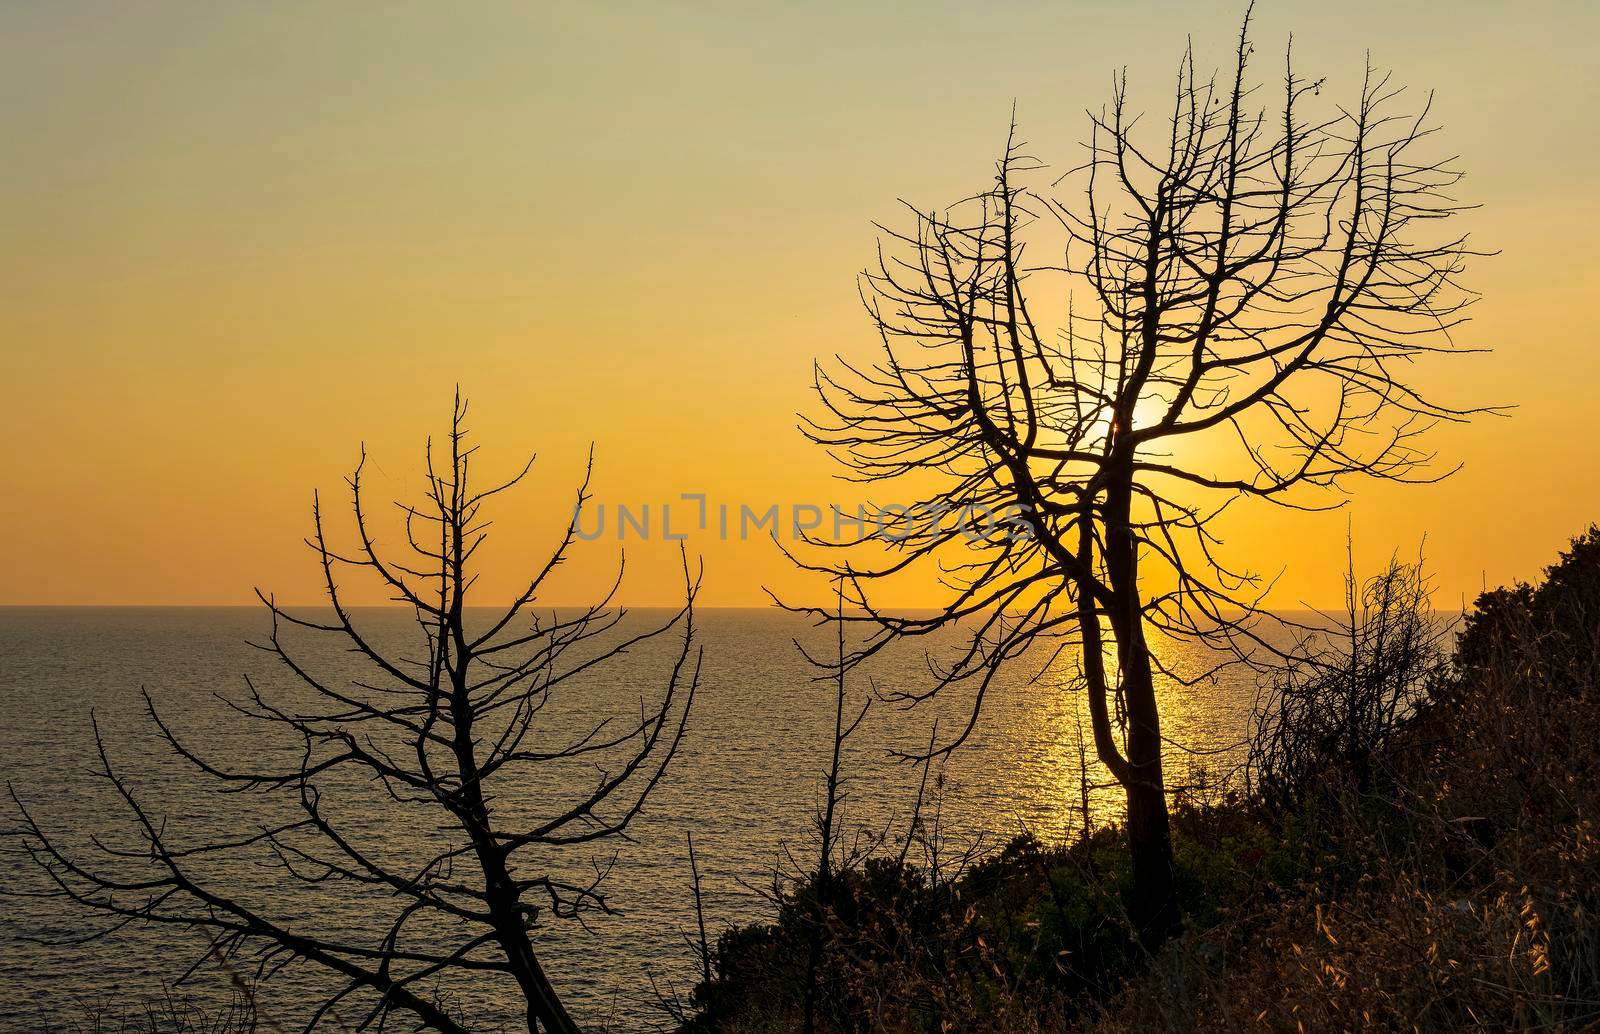 Tree at sunset in Palaiokastro castle of ancient Pylos by ankarb